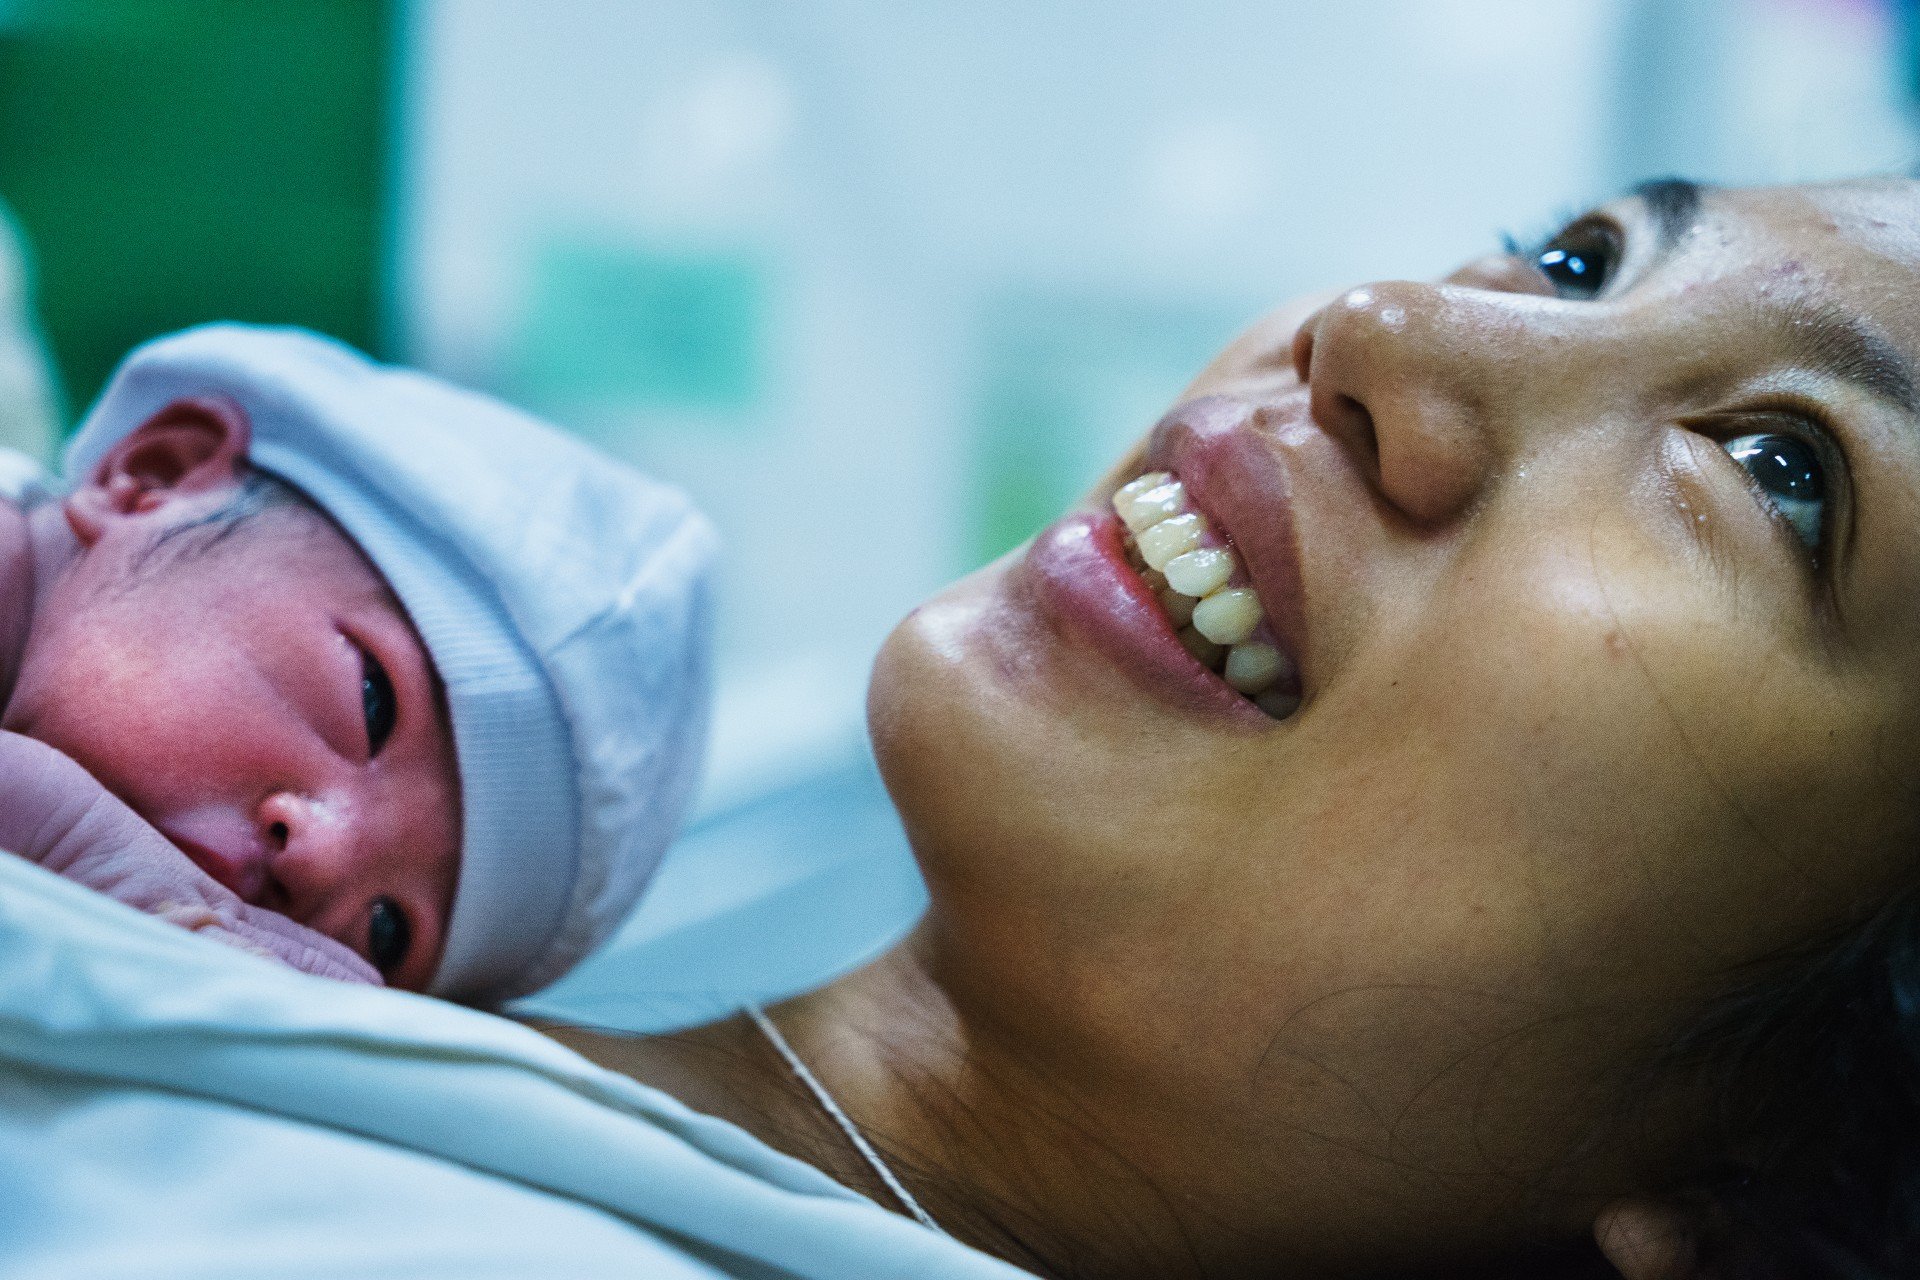 Direct skin-to-skin contact between mother and newborn baby in Dr Jose Fabella Memorial Hospital.